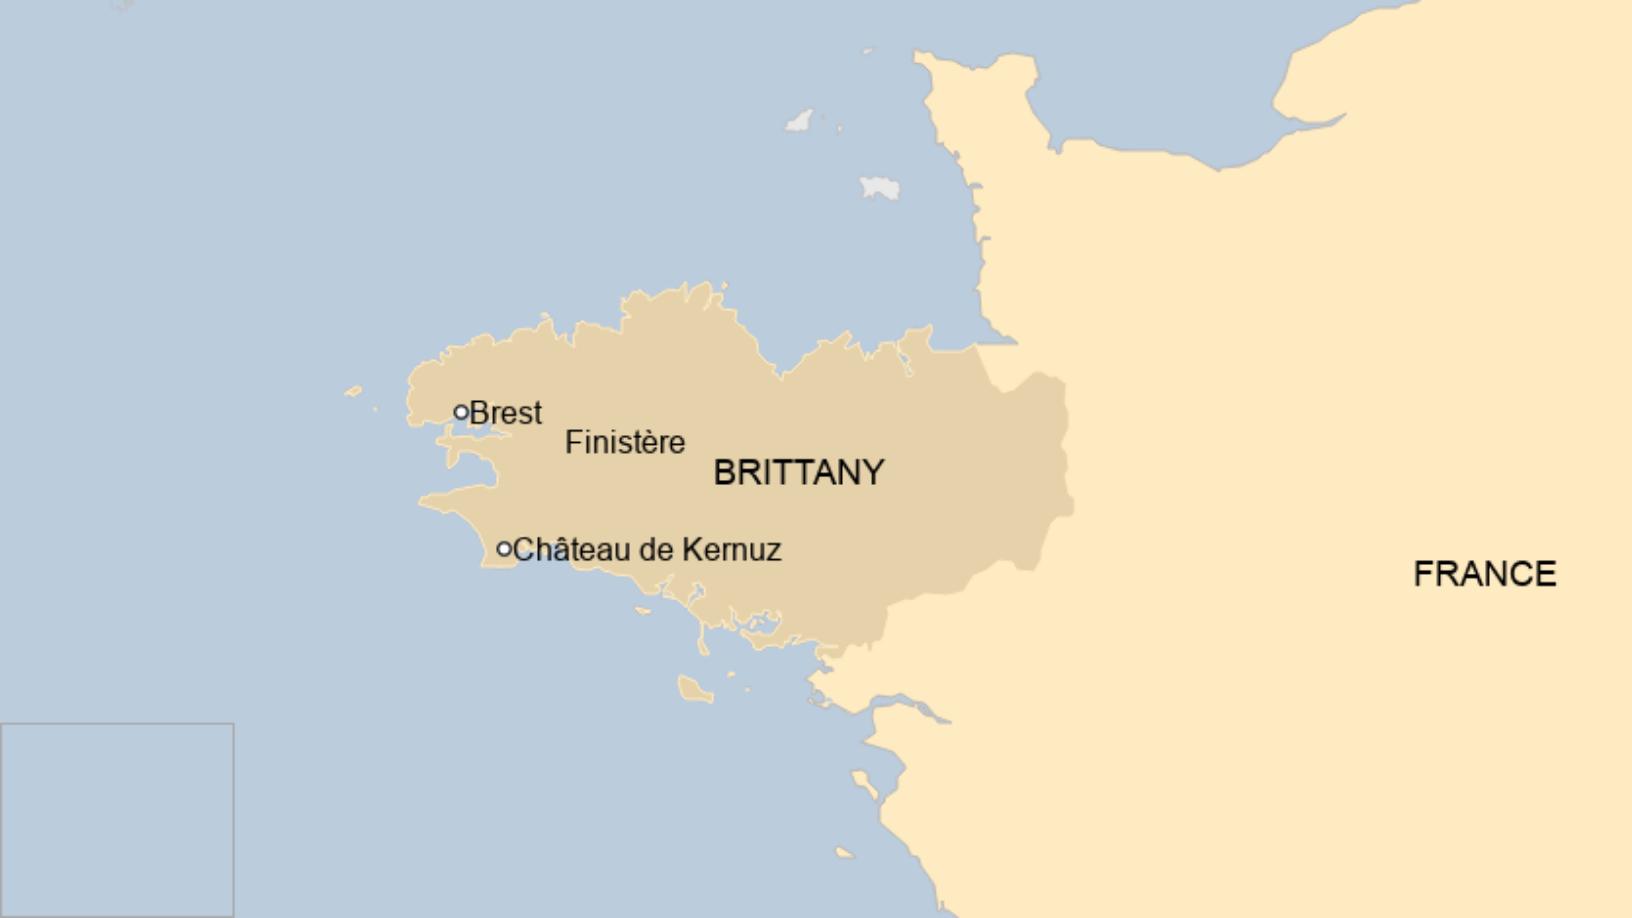 Map: Brittany, shown in north-western France, with Brest, Finistere in the west.